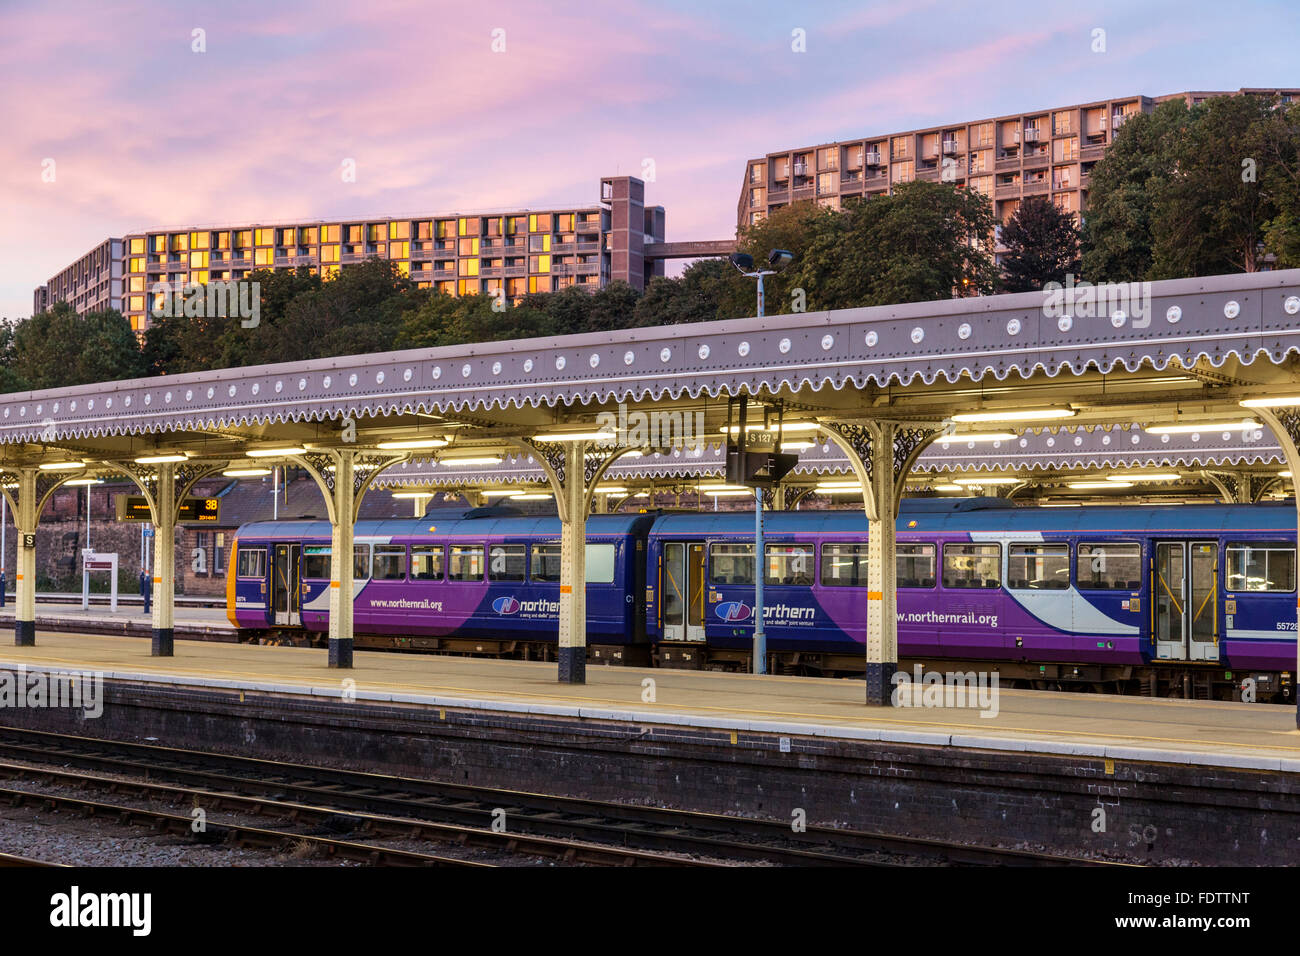 Northern train at Sheffield Railway Station as night approaches with Park Hill flats lit by evening light in the distance, Sheffield, England, UK Stock Photo